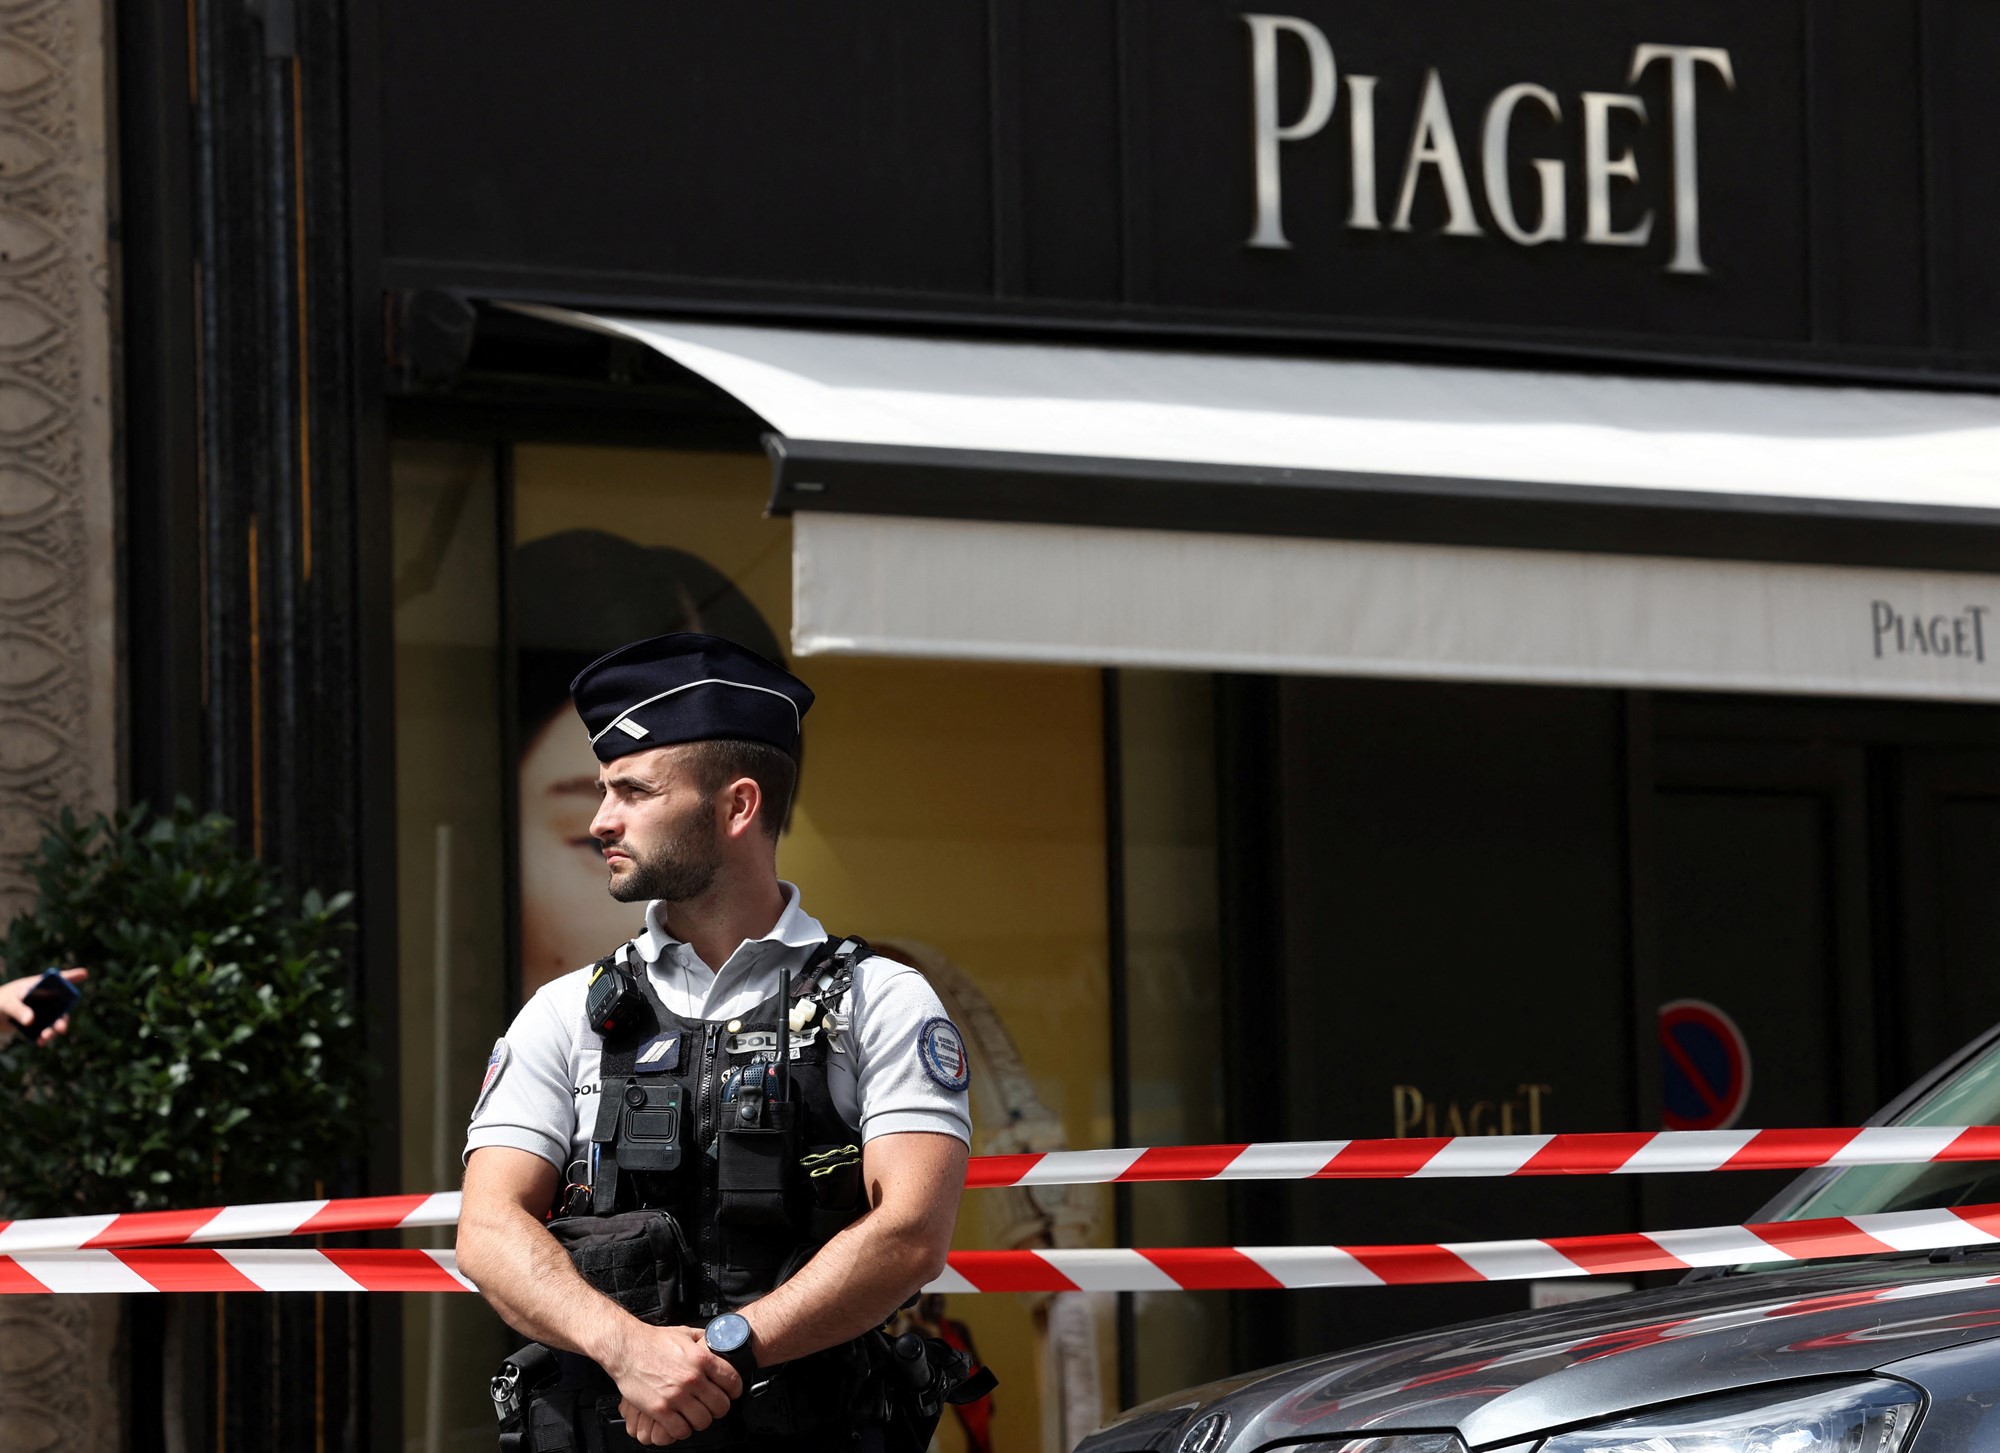 A man in police uniform stands guard outside the piaget store which is cordoned off by police tape